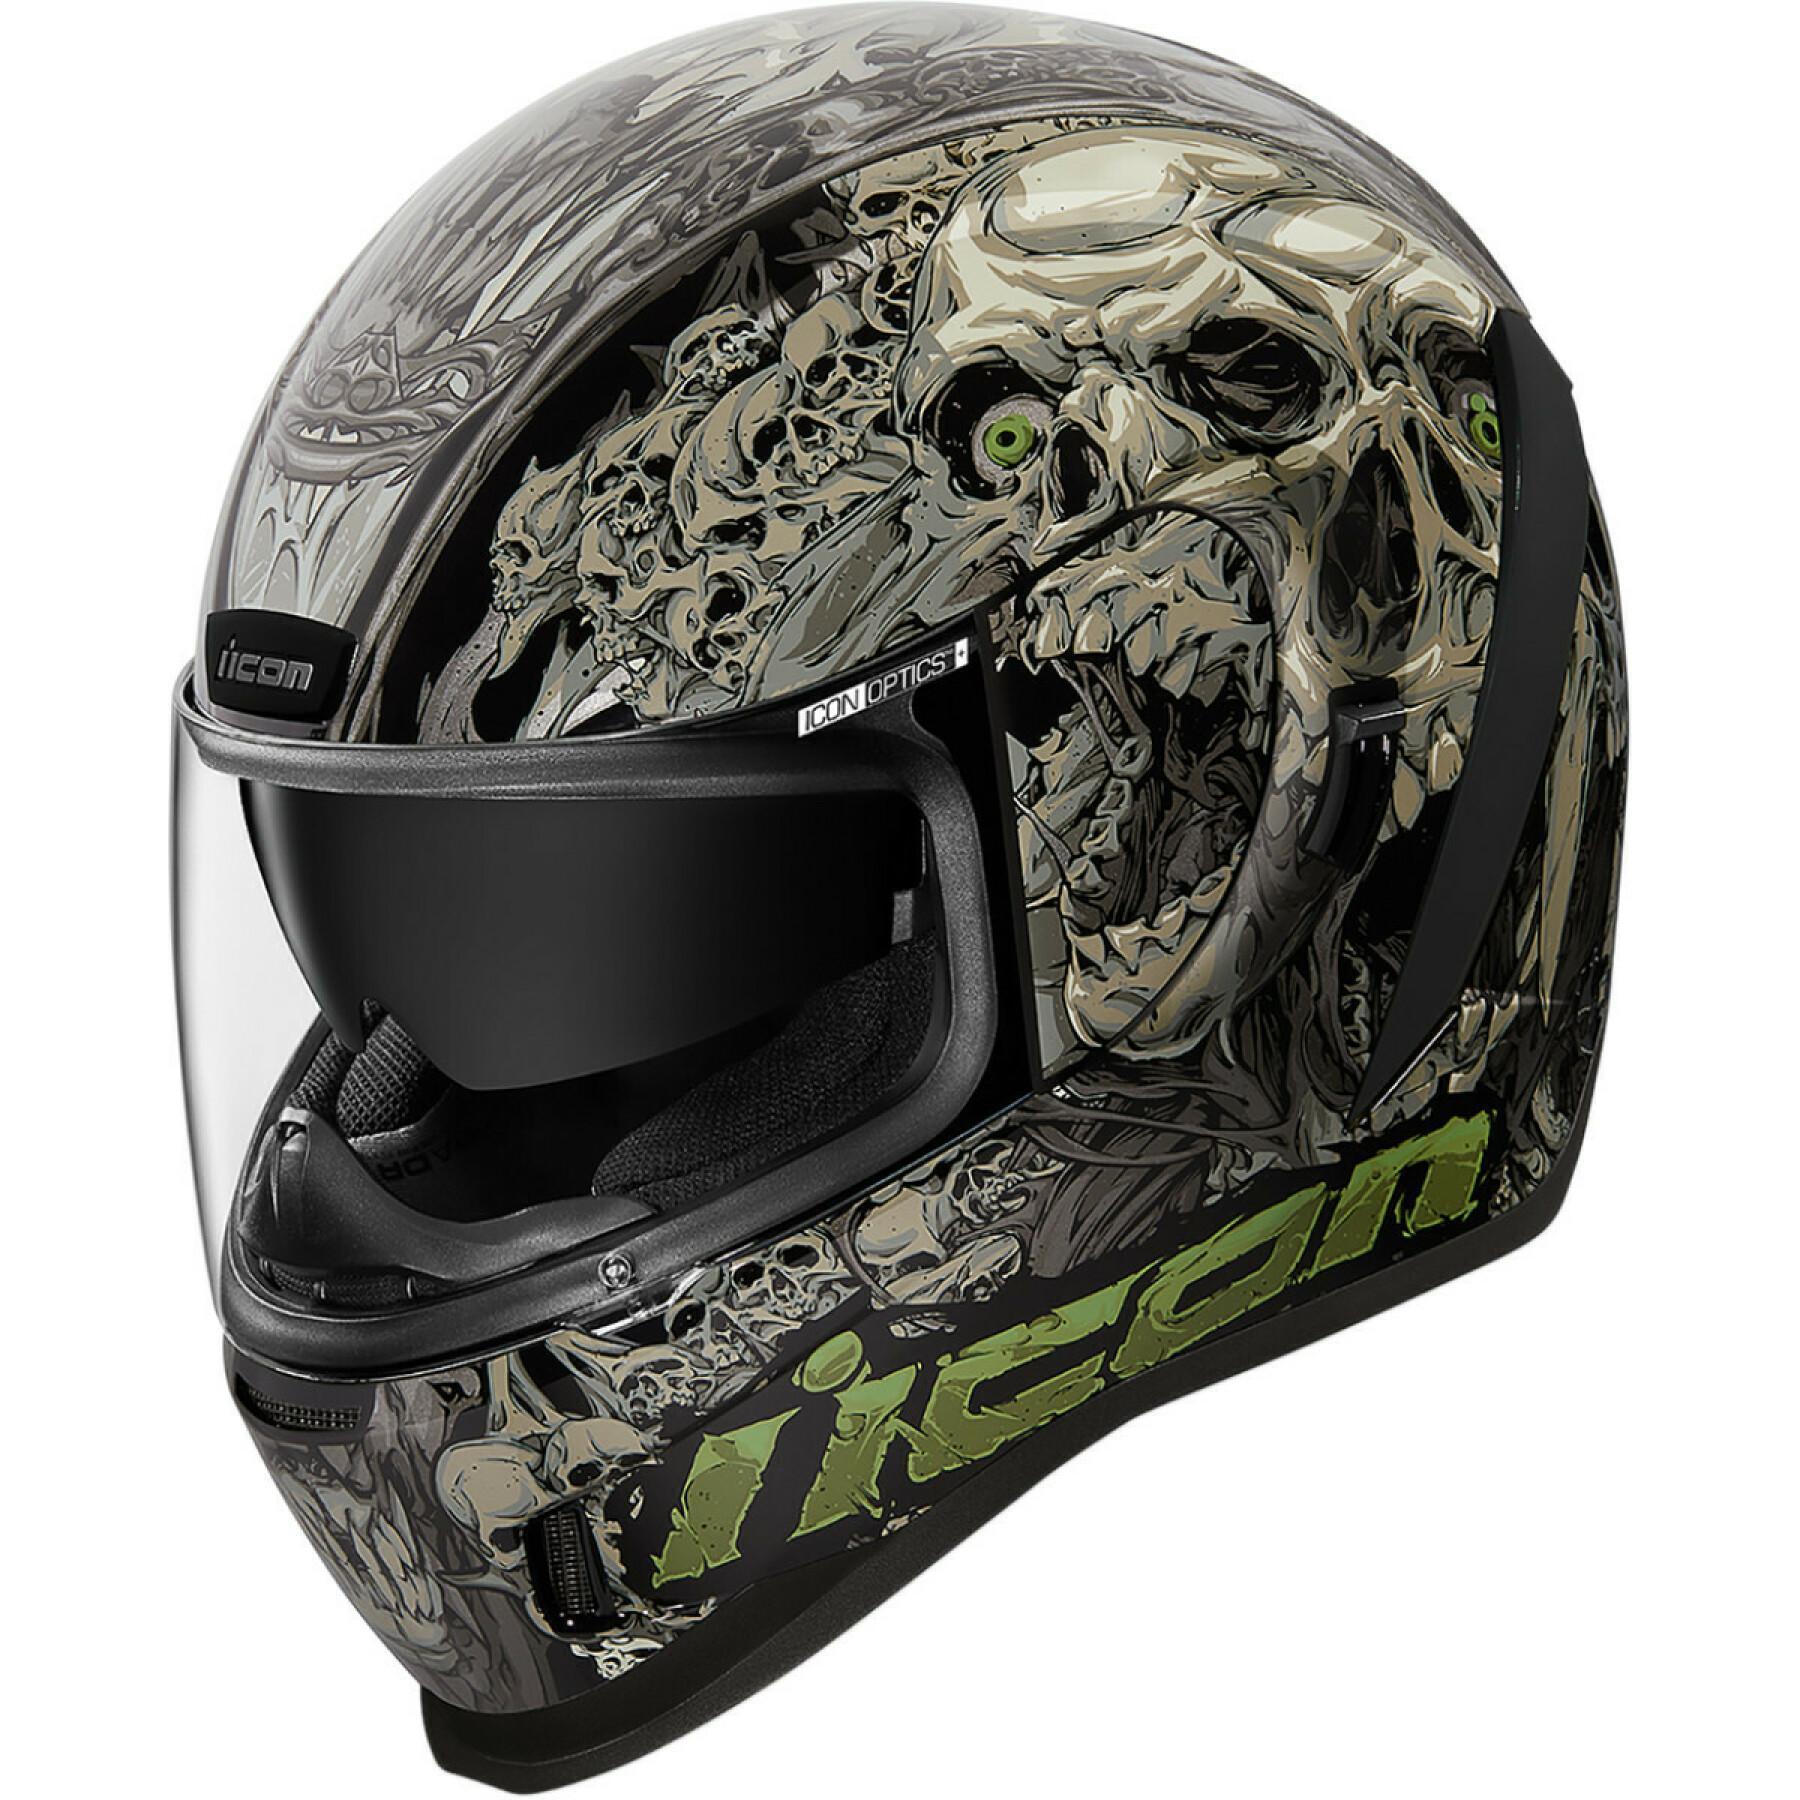 Full face motorcycle helmet Icon afrm parahuman